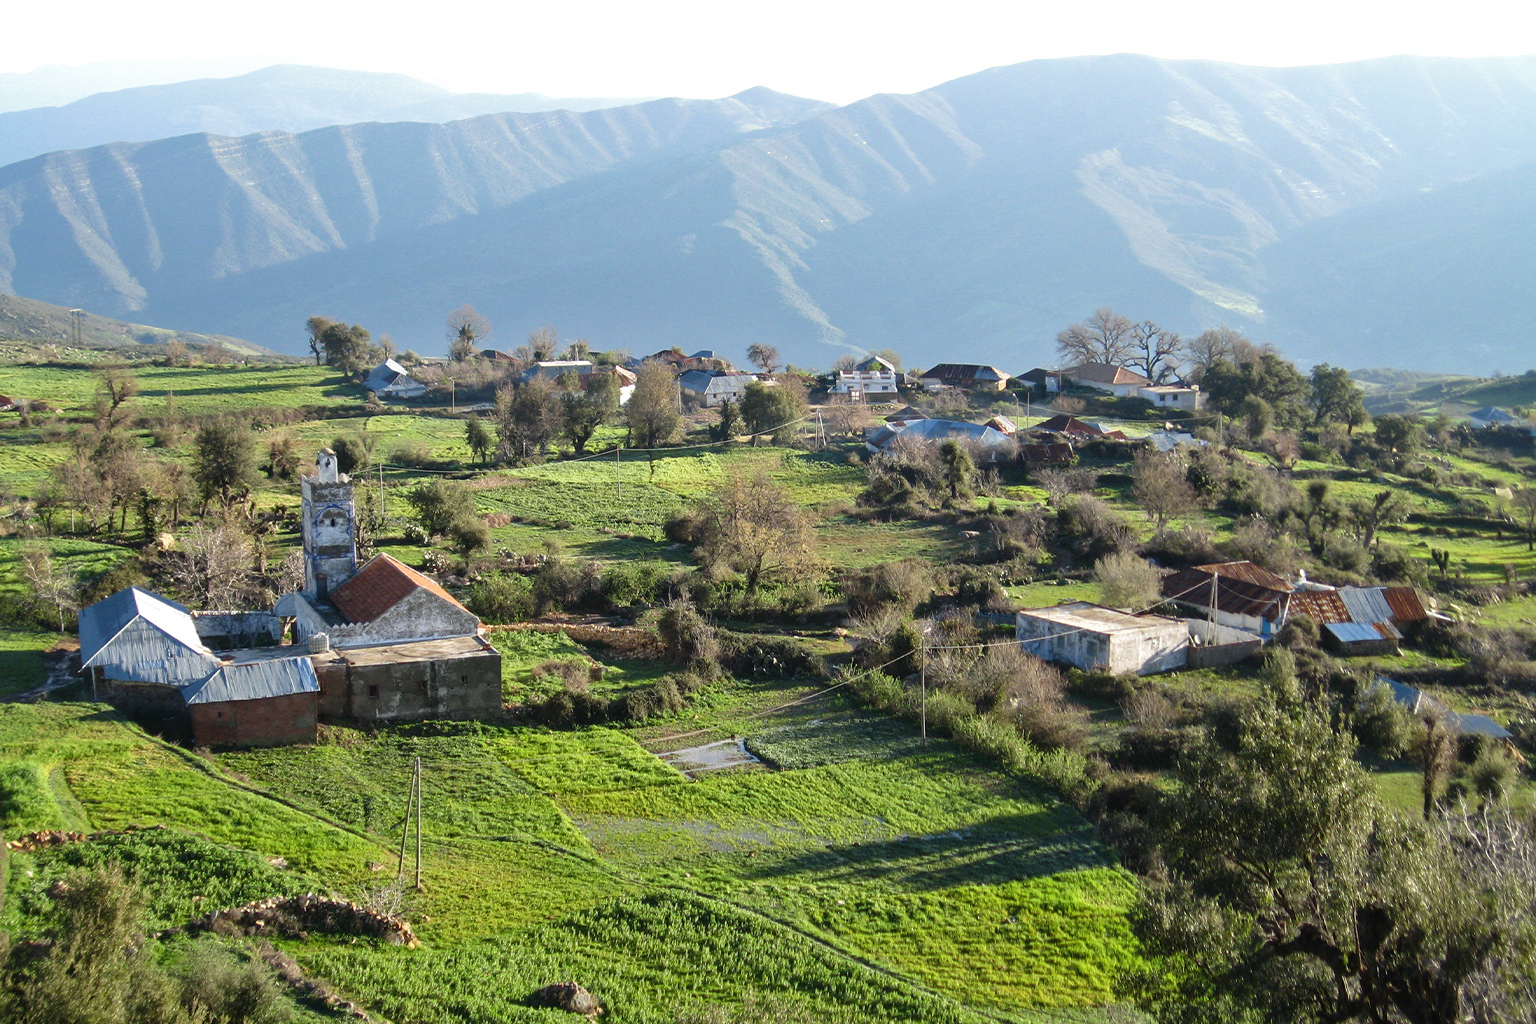 A village in Bouhachem with the Rif mountains in the background.